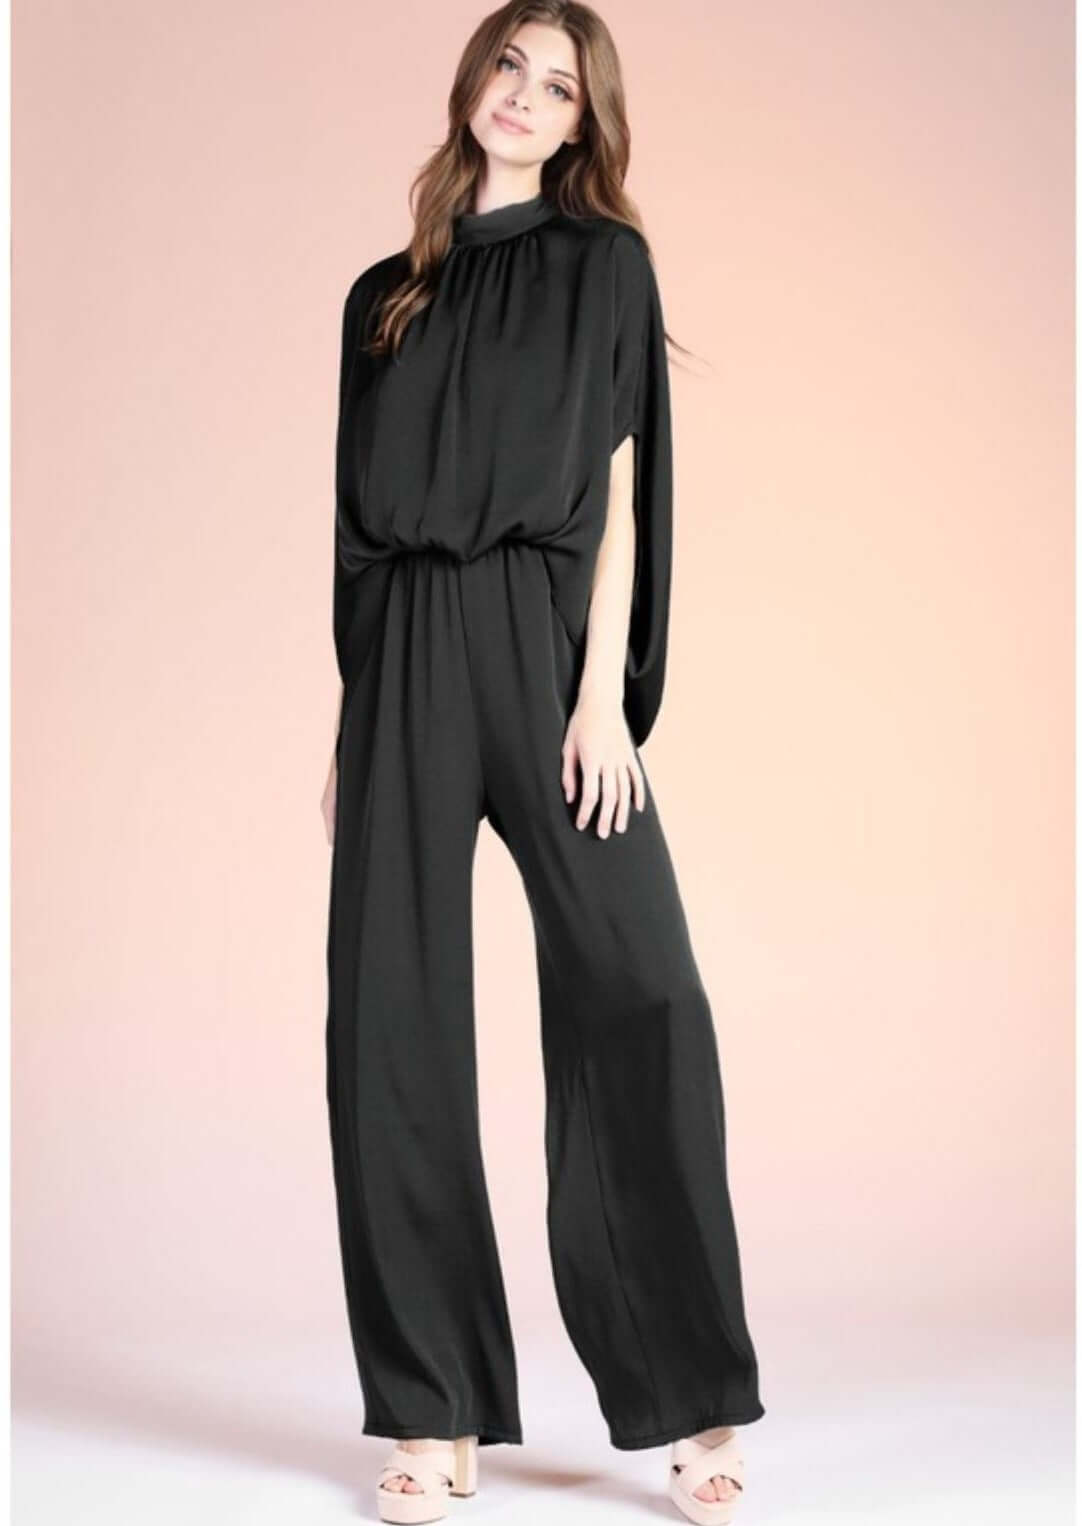 Ladies Black Elegant & Trendy Satin Finish Dressy Jumpsuit Proudly Made in USA | Tyche Style JP-7707 | Women's Made in America Clothing Boutique